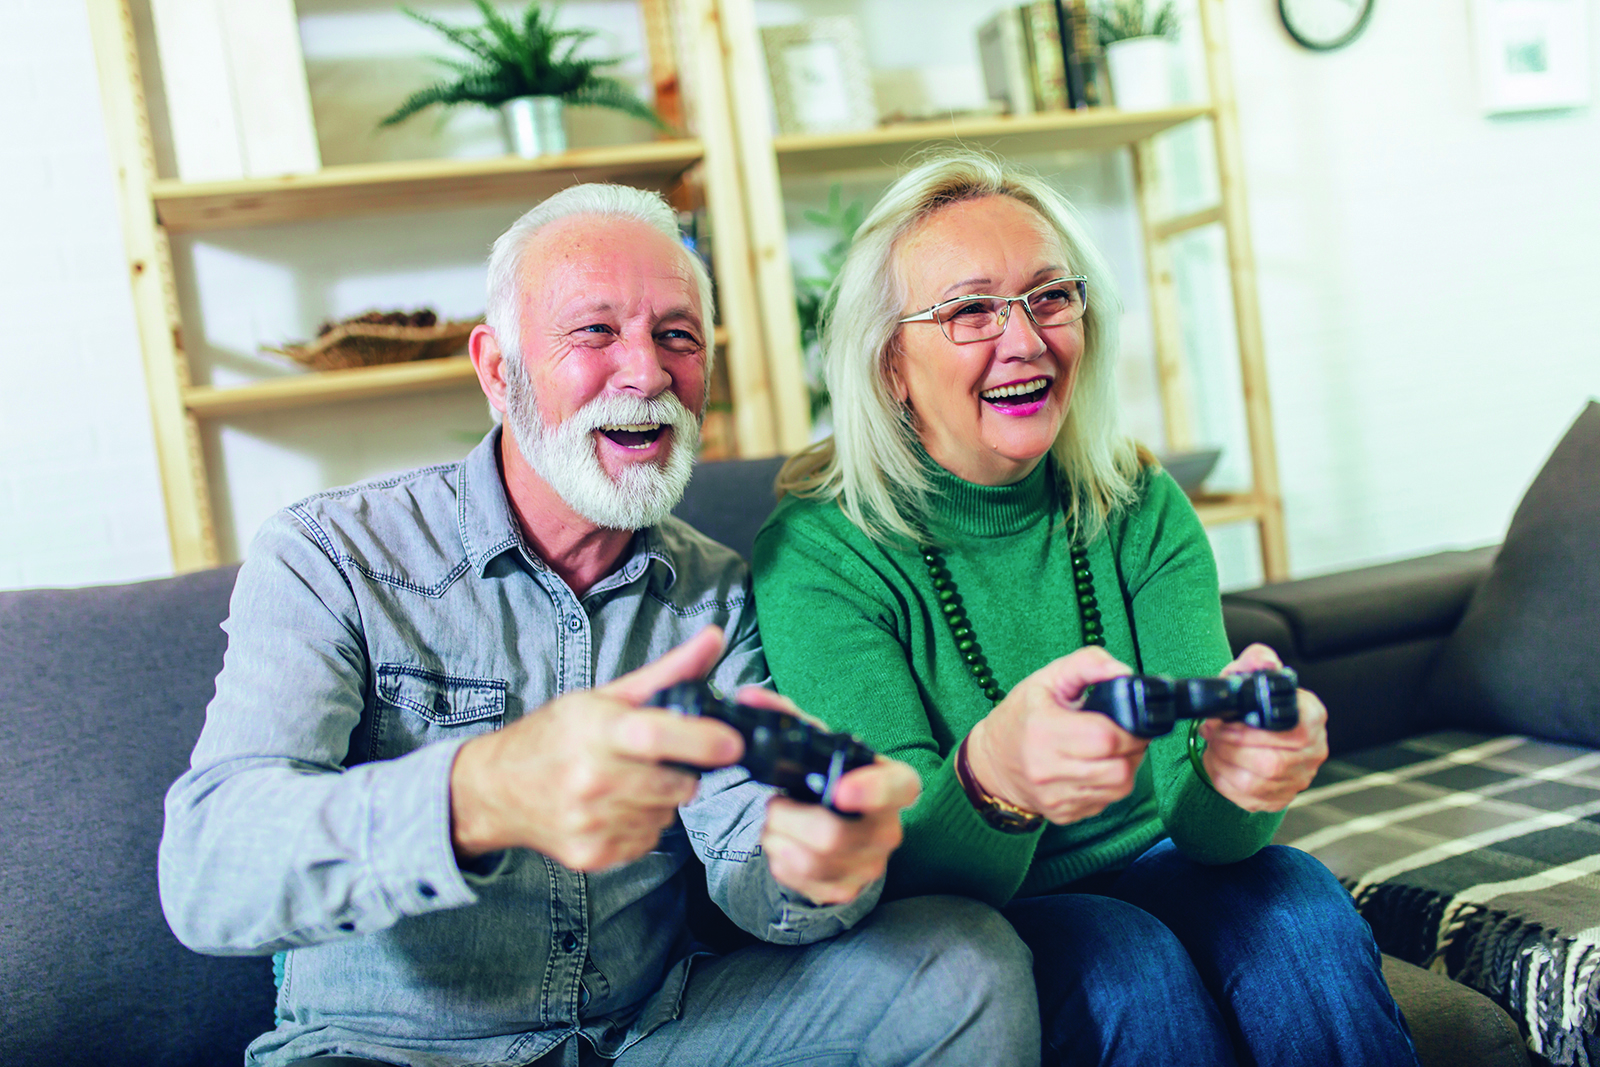  Shams Chateauway |  Do you know the benefits of video games for the elderly?

